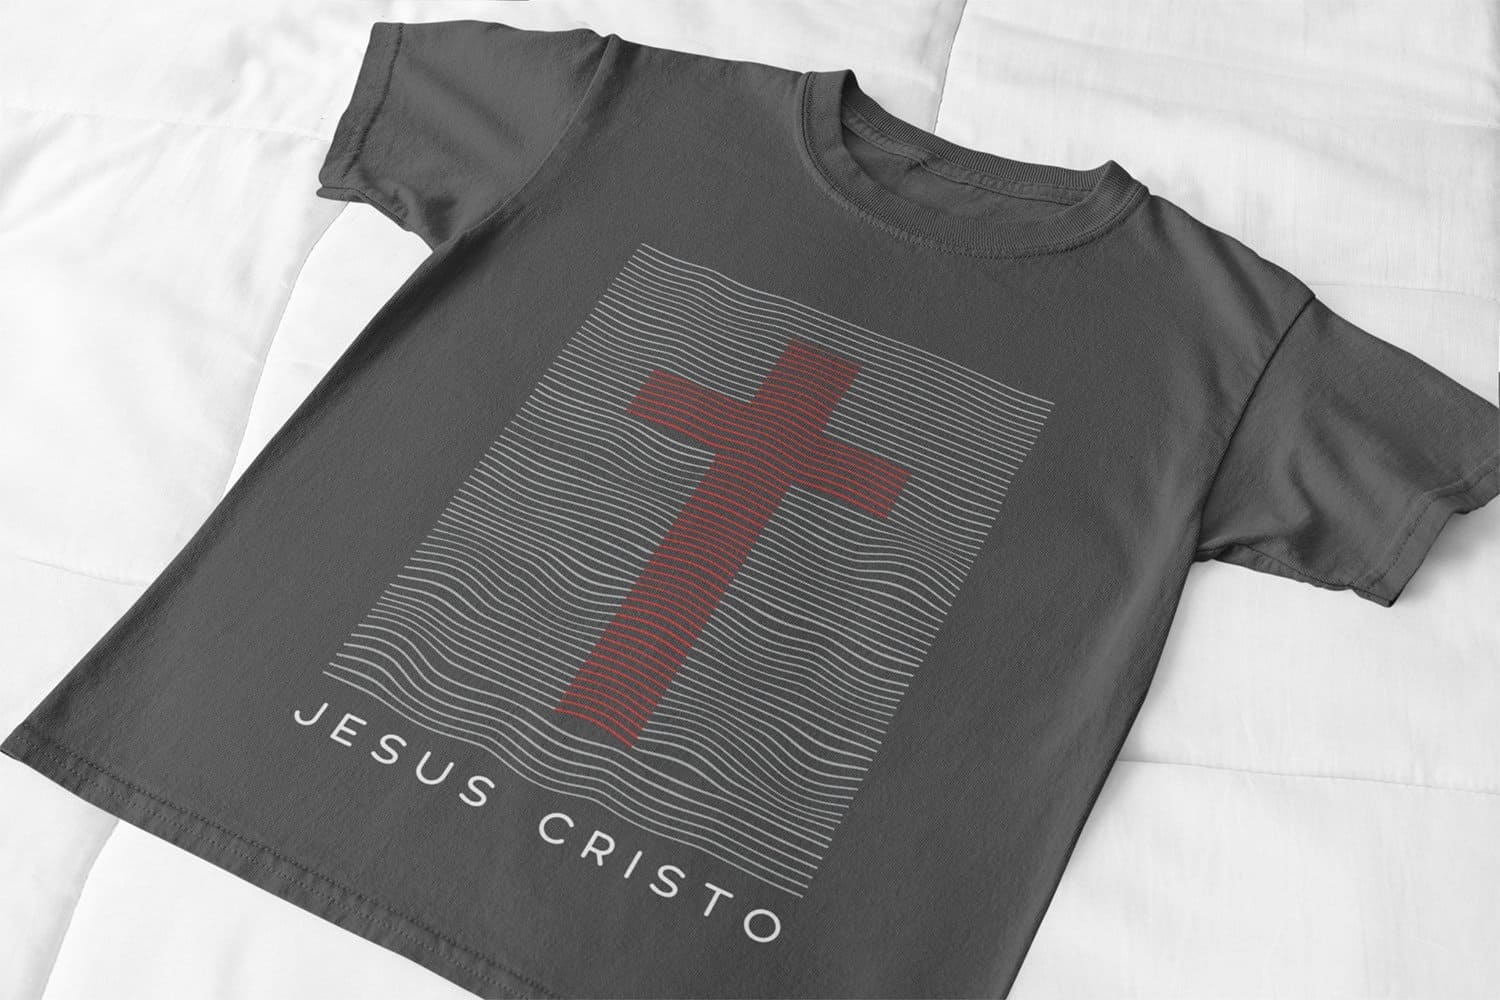 The inscription Jesus Christ under a red cross on a black T-shirt.